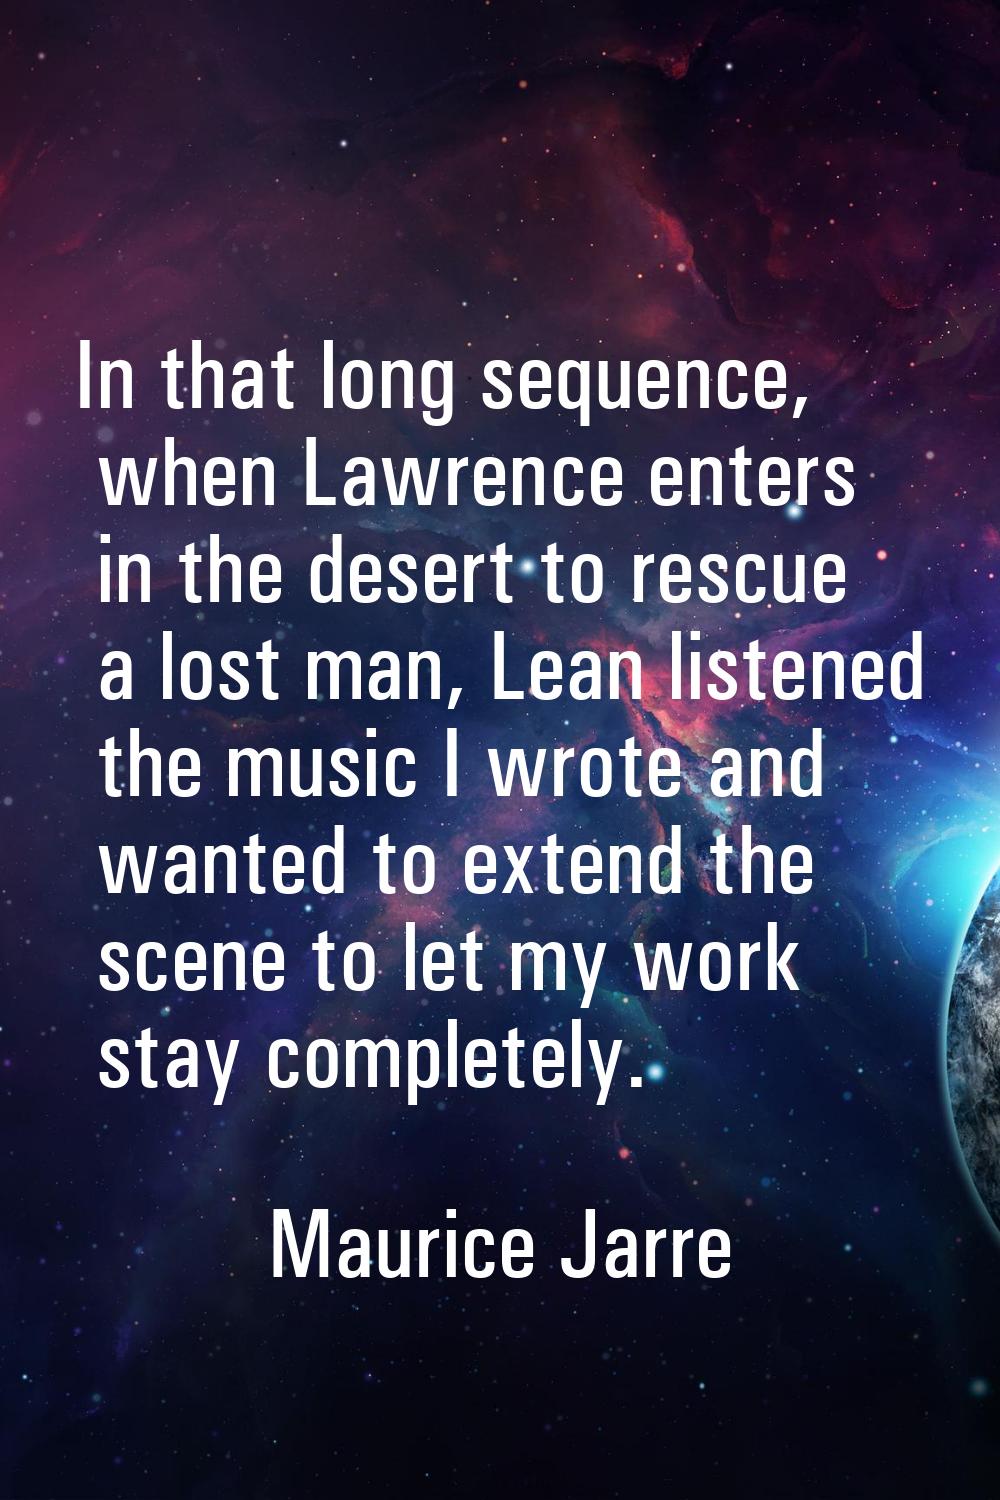 In that long sequence, when Lawrence enters in the desert to rescue a lost man, Lean listened the m